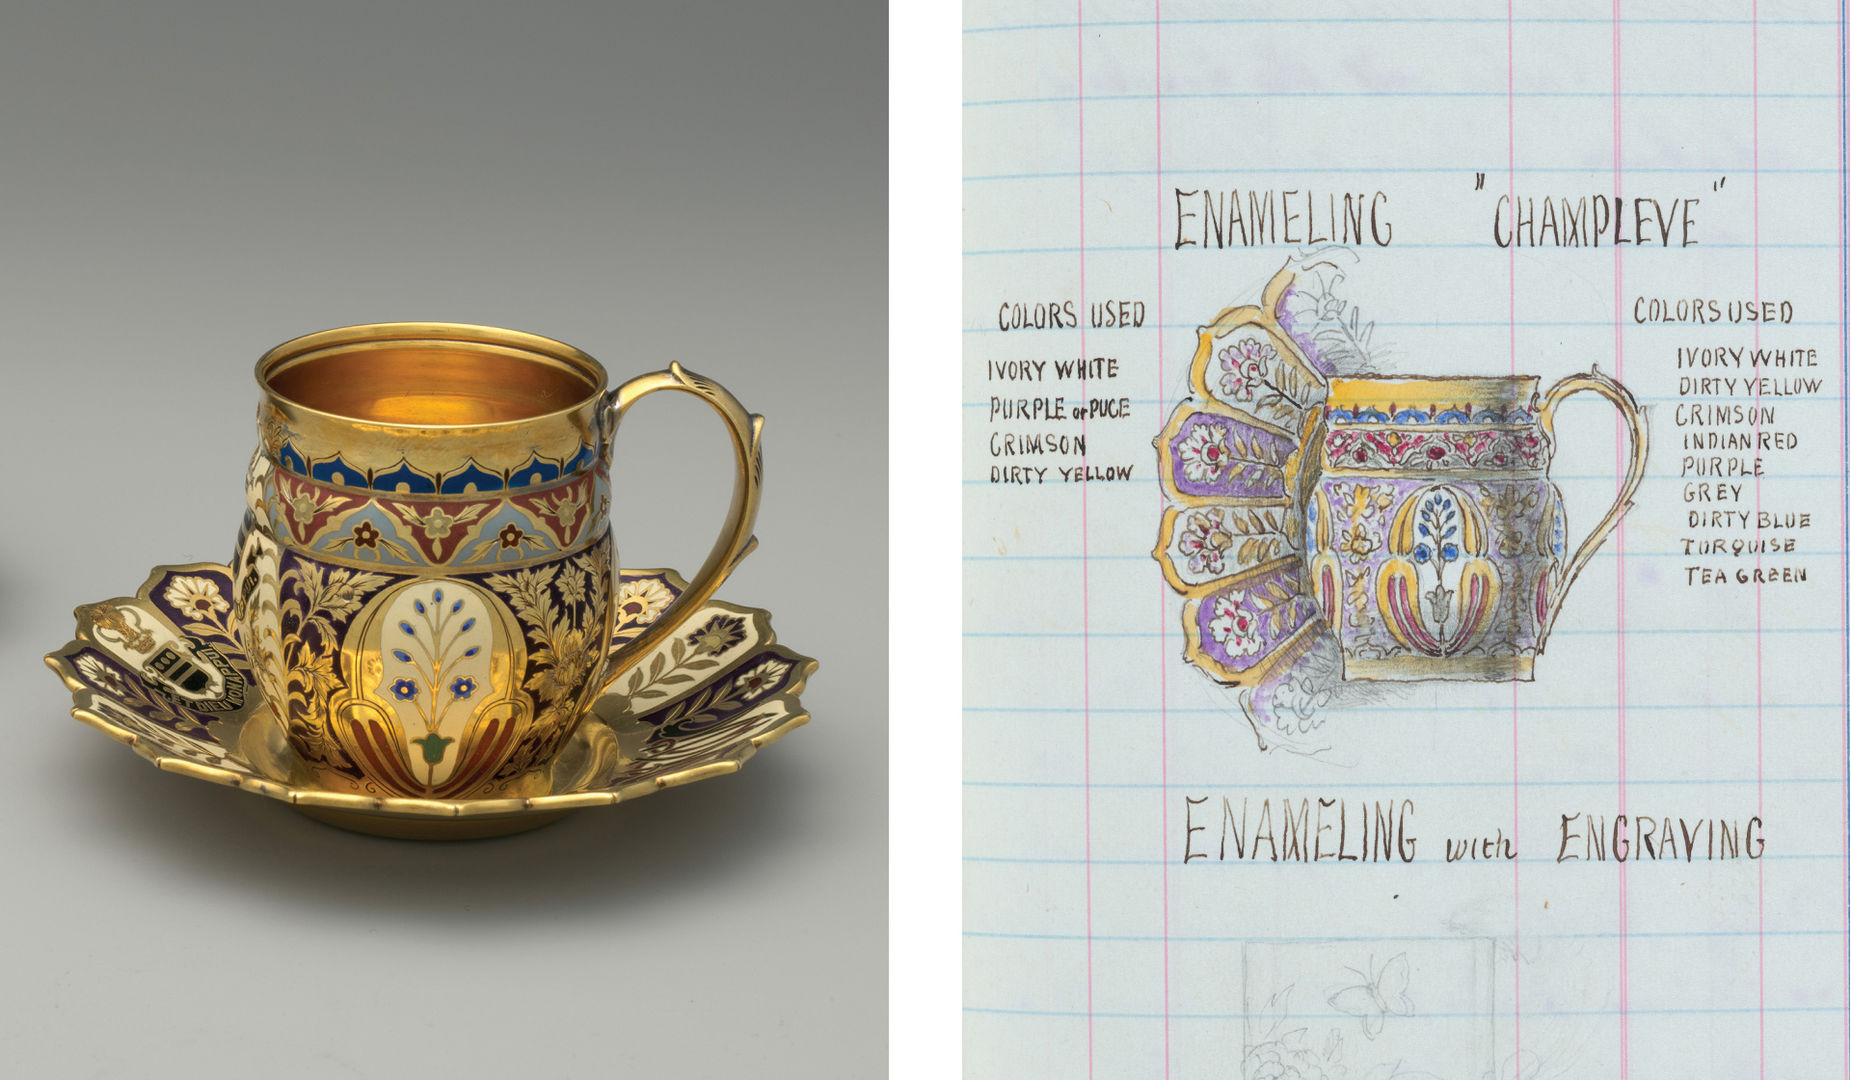 Composite image of a dazzling gilded and enameled cup and saucer alongside a hand-drawn and colored illustration of the floral design with notes about the colors used in the enameling such as ivory white, dirty yellow, crimson, indian red, purple, gray, dirty blue, turquoise, tea green.